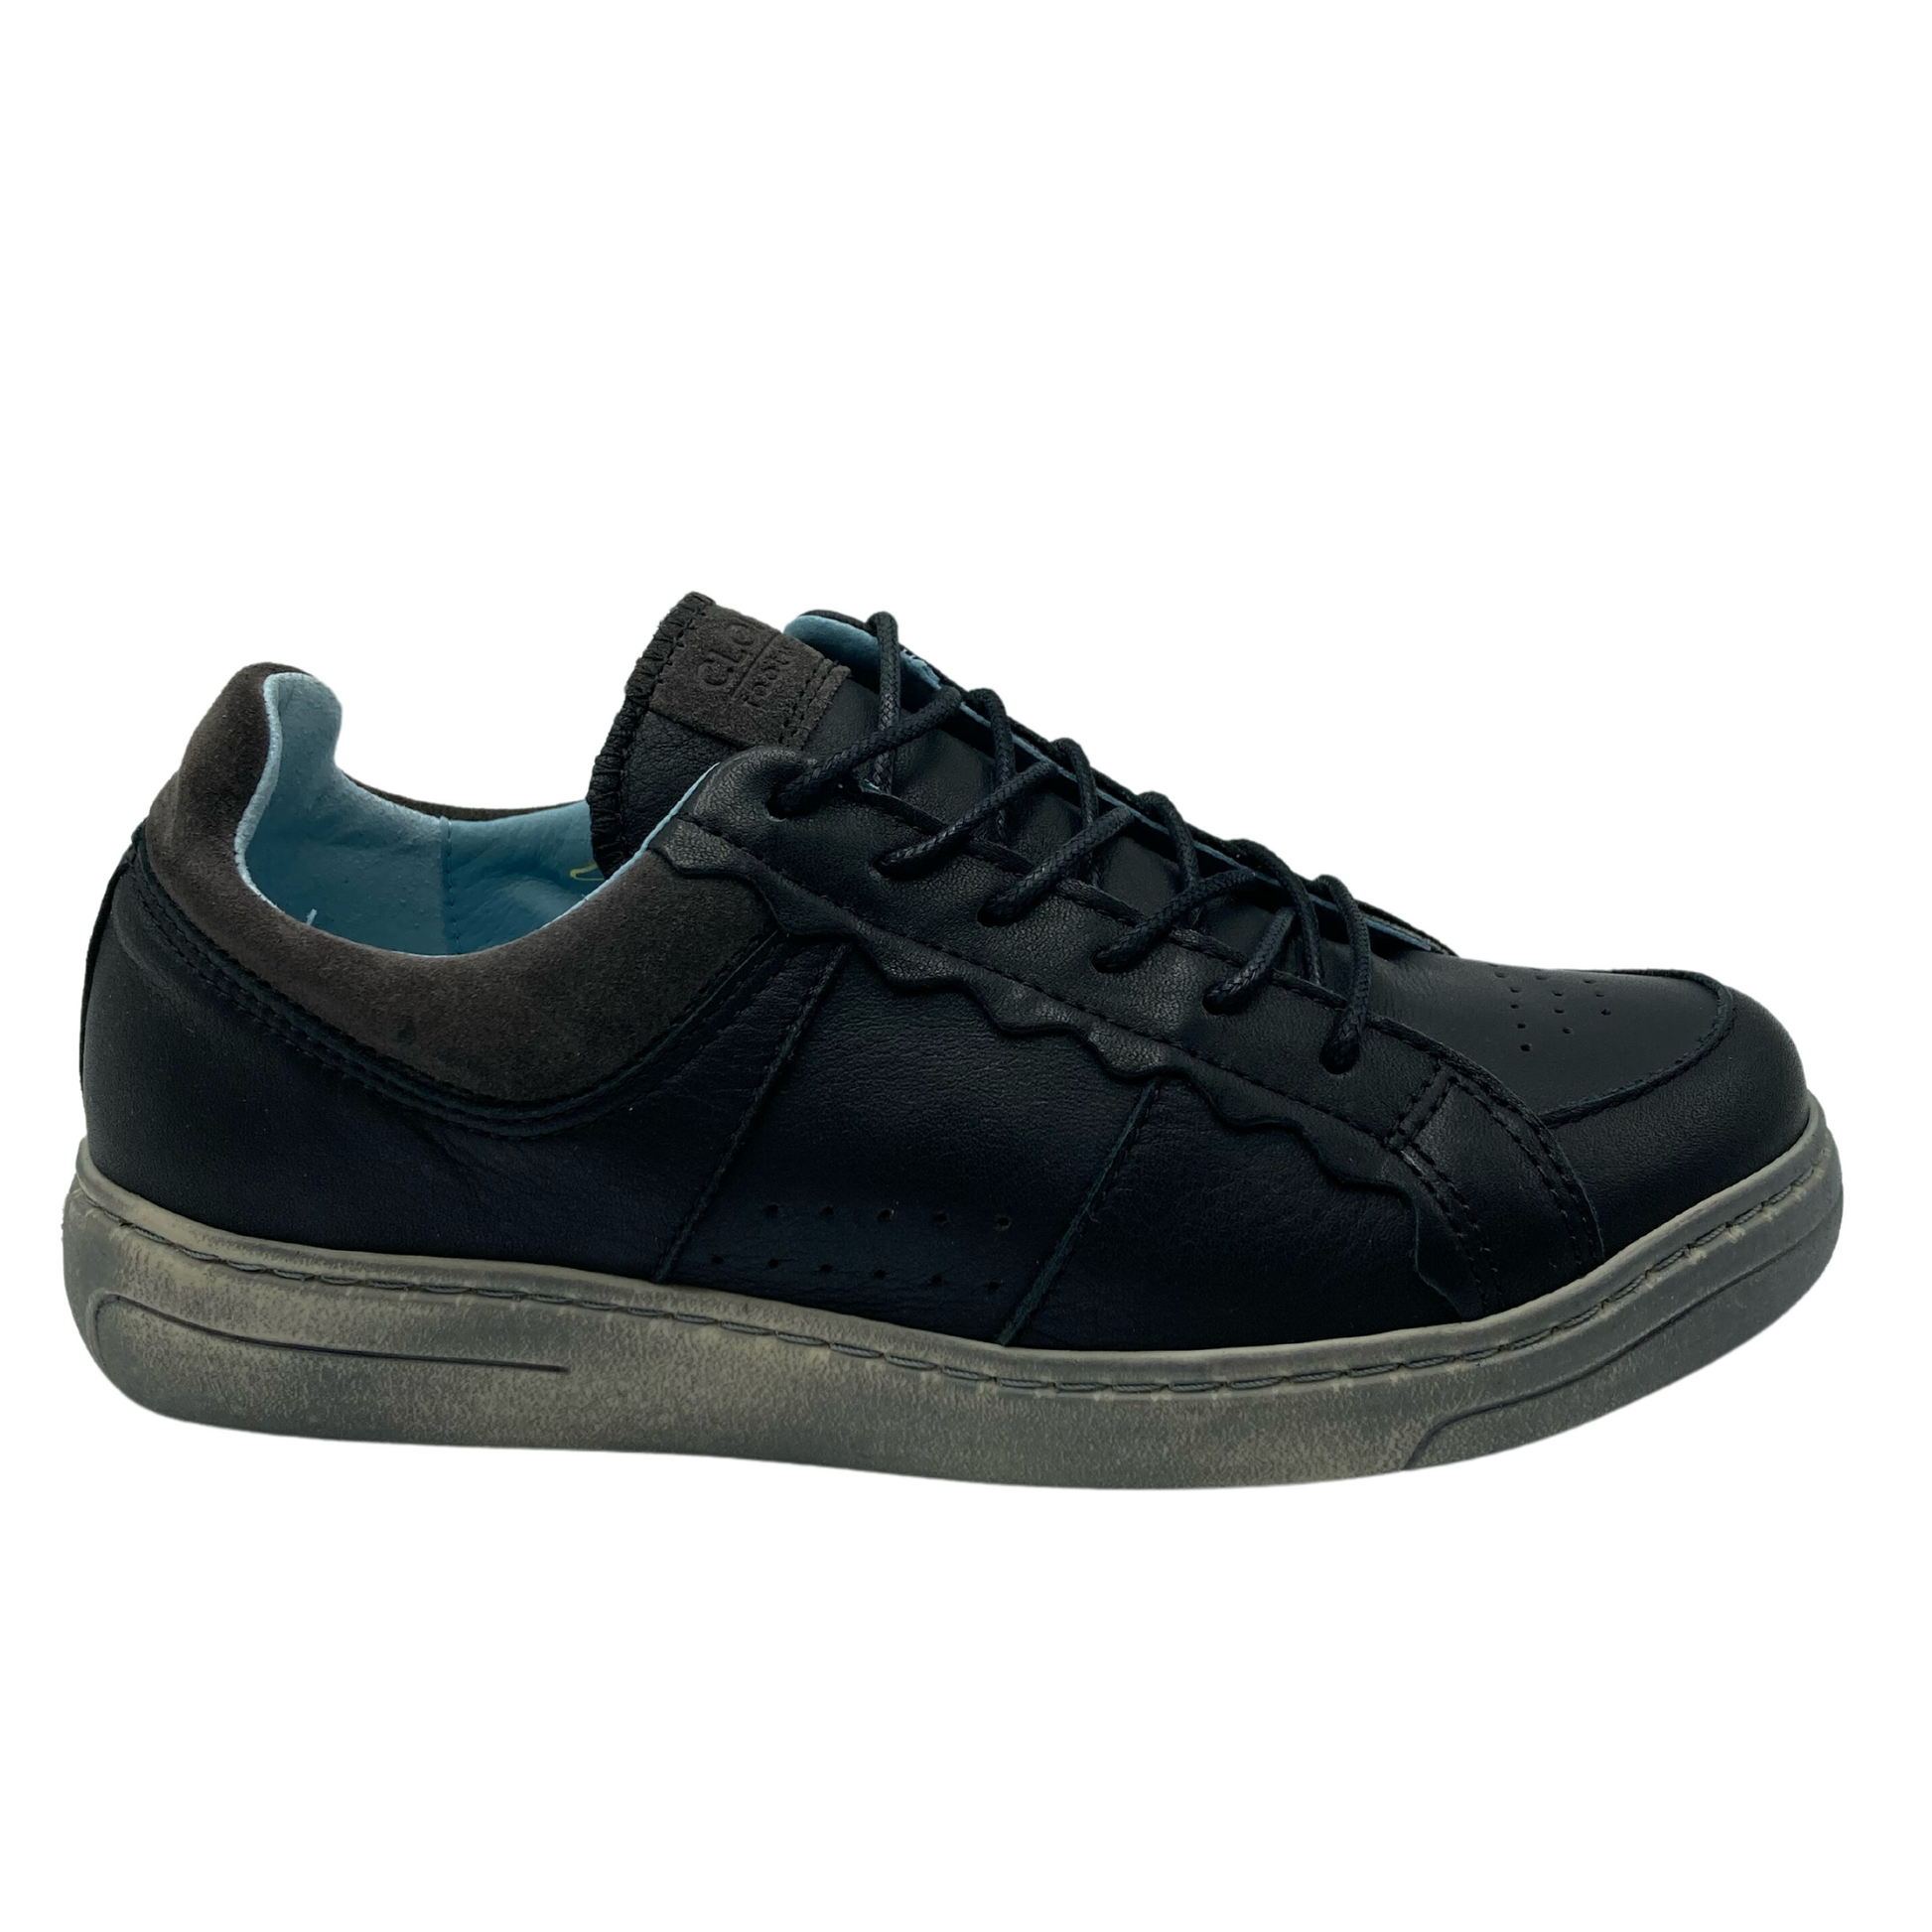 Right facing view of black leather sneaker with matching laces and grey rubber outsole